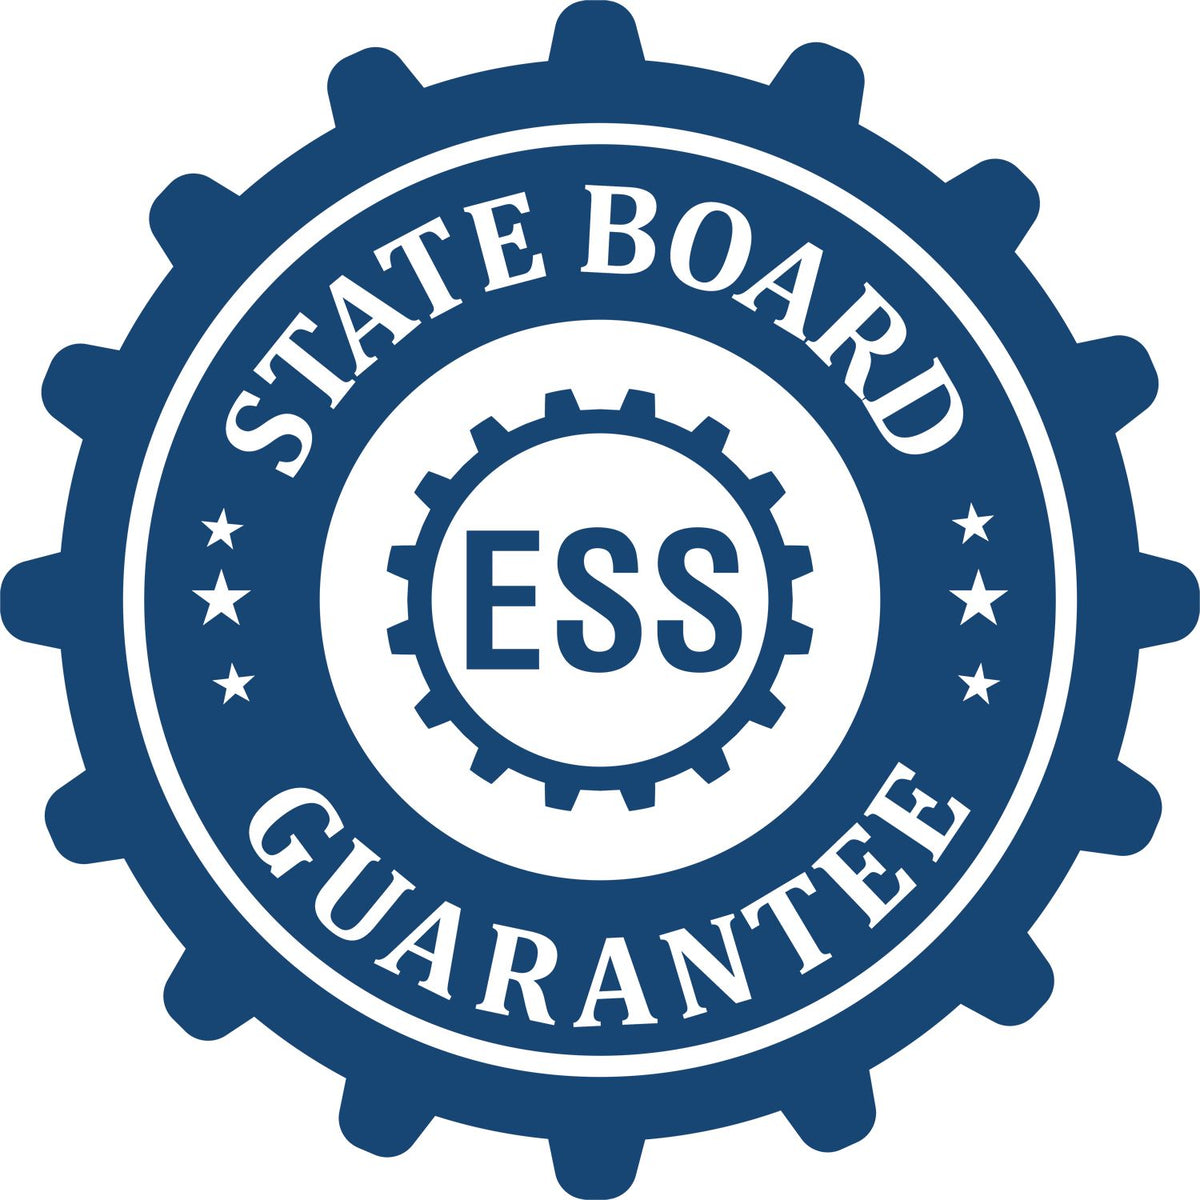 An emblem in a gear shape illustrating a state board guarantee for the Super Slim Rhode Island Notary Public Stamp product.